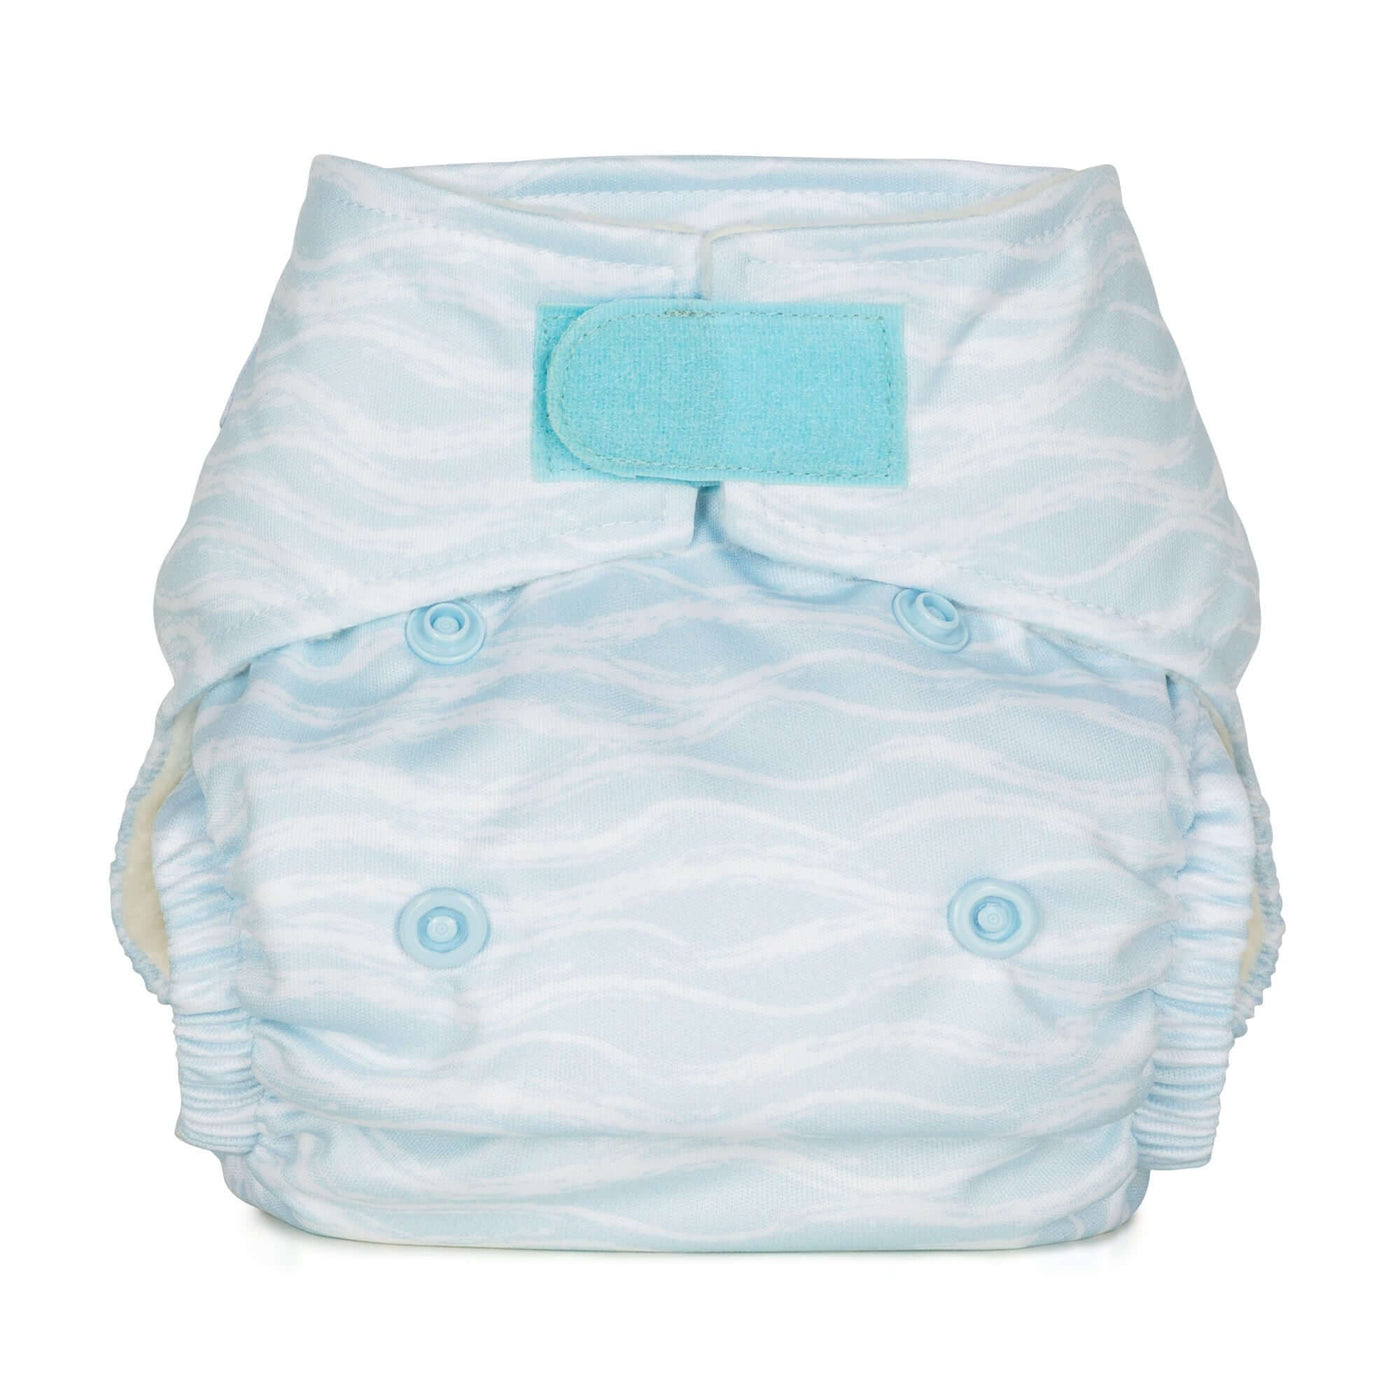 Baba + Boo Newborn Reusable Nappy - Prints Colour: Waves reusable nappies all in one nappies Earthlets